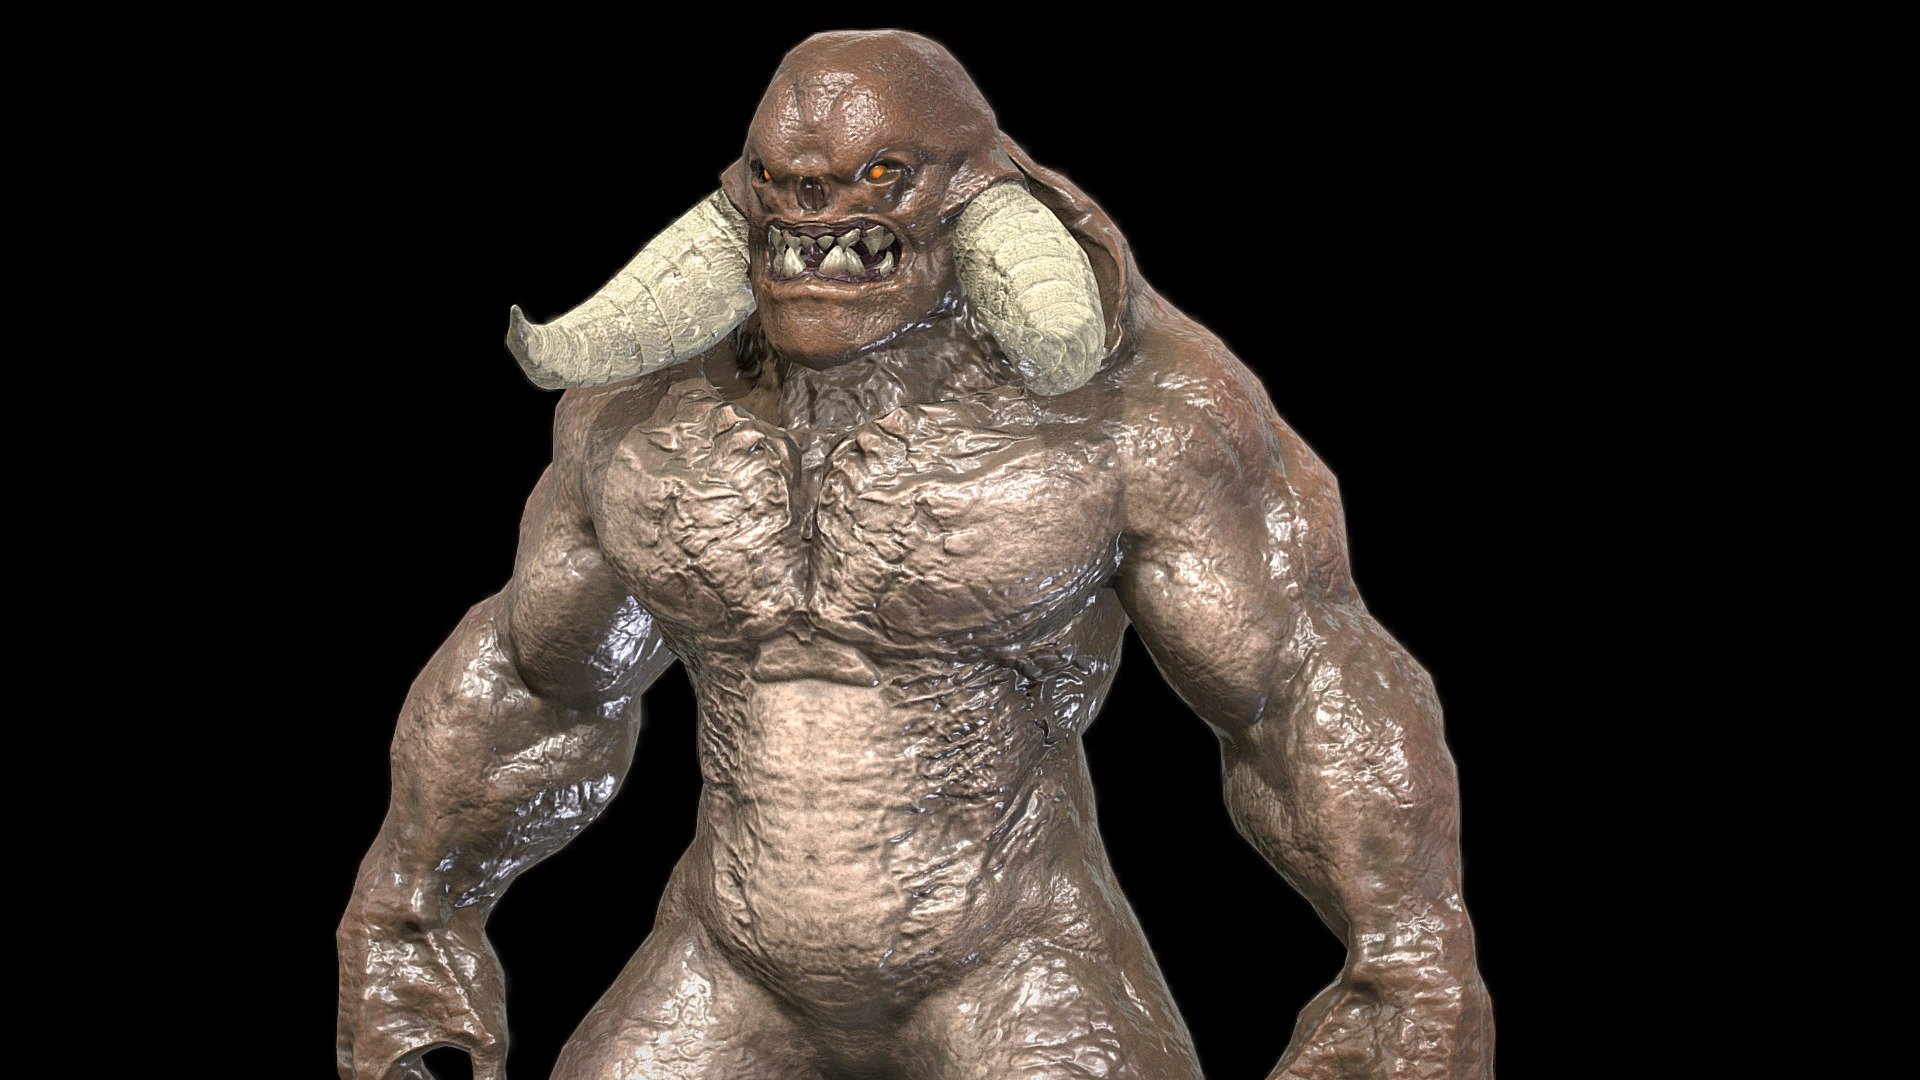 Low-poly model of the character BigDemon5

Suitable for games of different genre: RPG, strategy, first-person shooter, etc.

Textures pack one 4096x4096

three skins

5 materials

6 texture maps

The model contains 7 animations

attack

attack2

running

jump

ThirdPersonIdle

ThirdPersonIdle2

walk

faces 16800

verts 8500

tris 16800 - Big Demon 5 - Buy Royalty Free 3D model by Phazan Product (@Phazan) 3d model